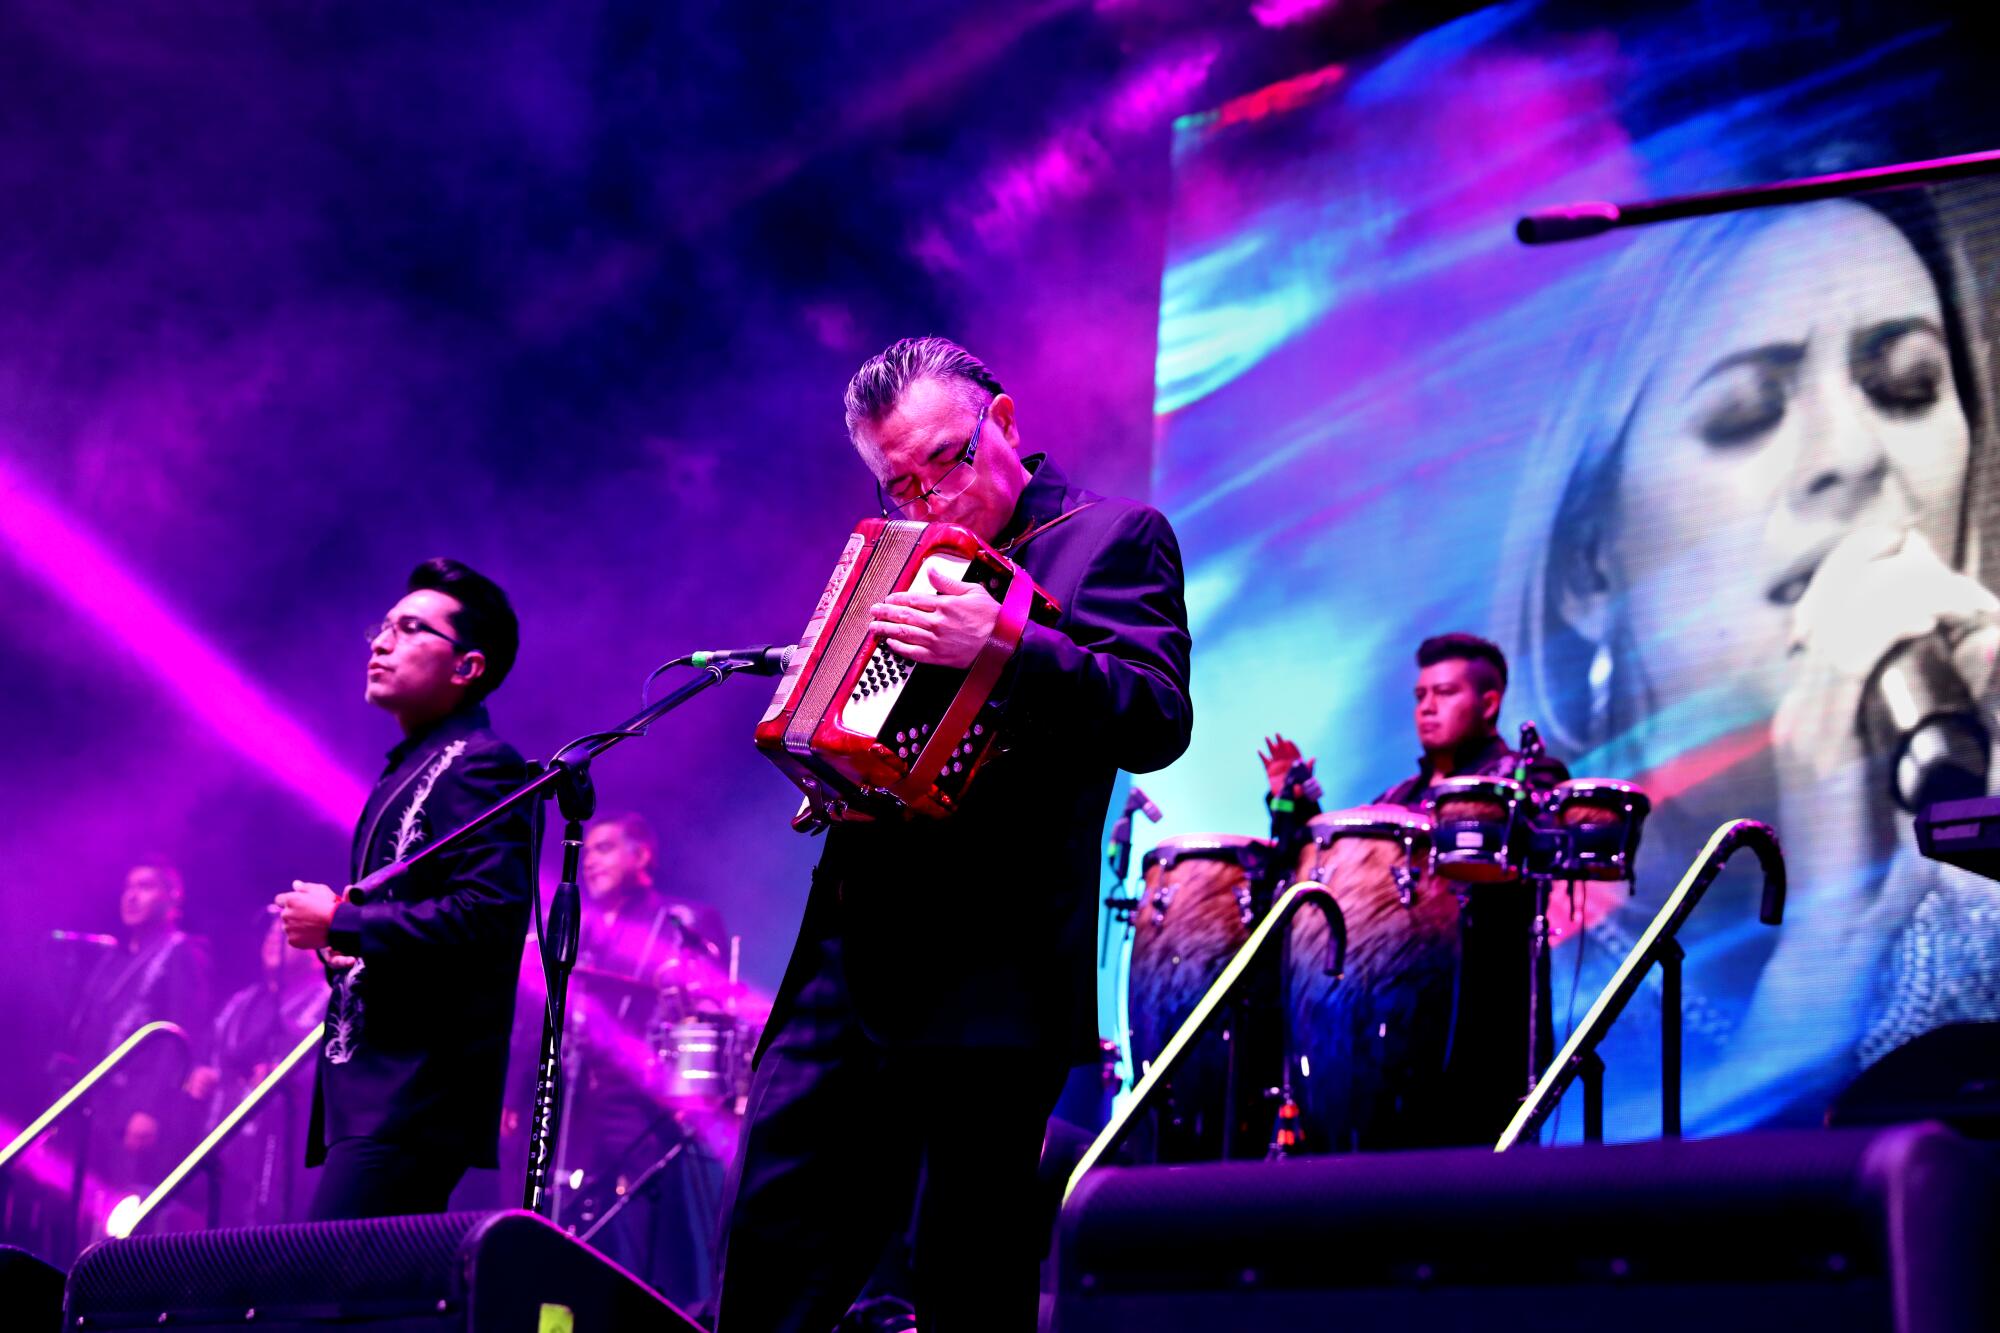 A man plays an accordion on stage with the rest of the band performing in Estero, Fla.